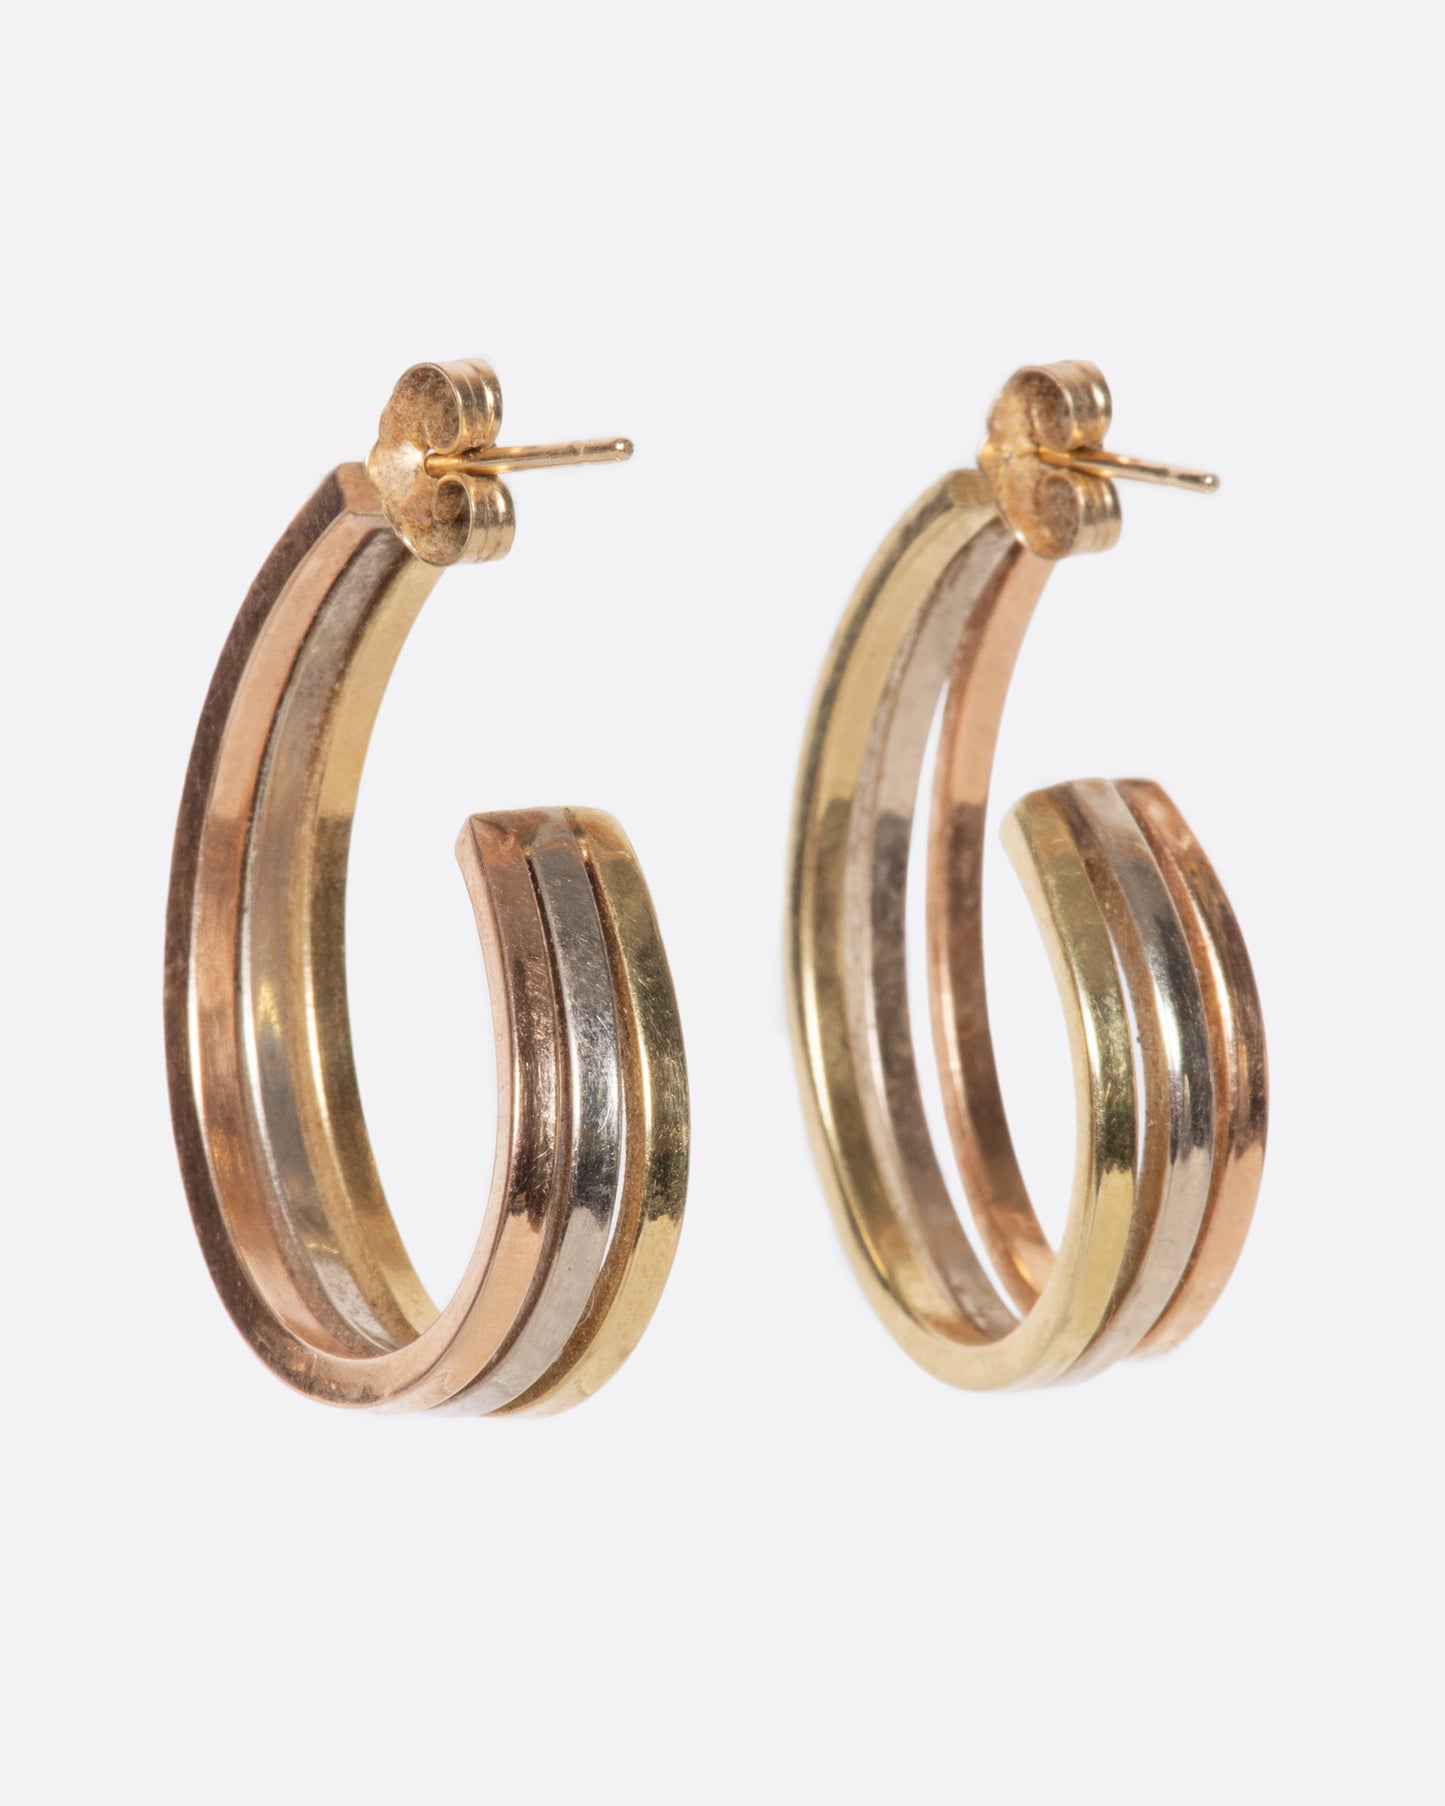 A pair of vintage yellow, white, and rose gold earrings. They curl elegantly under your ear, offering exceptional wearability with the beautiful mix of metals.